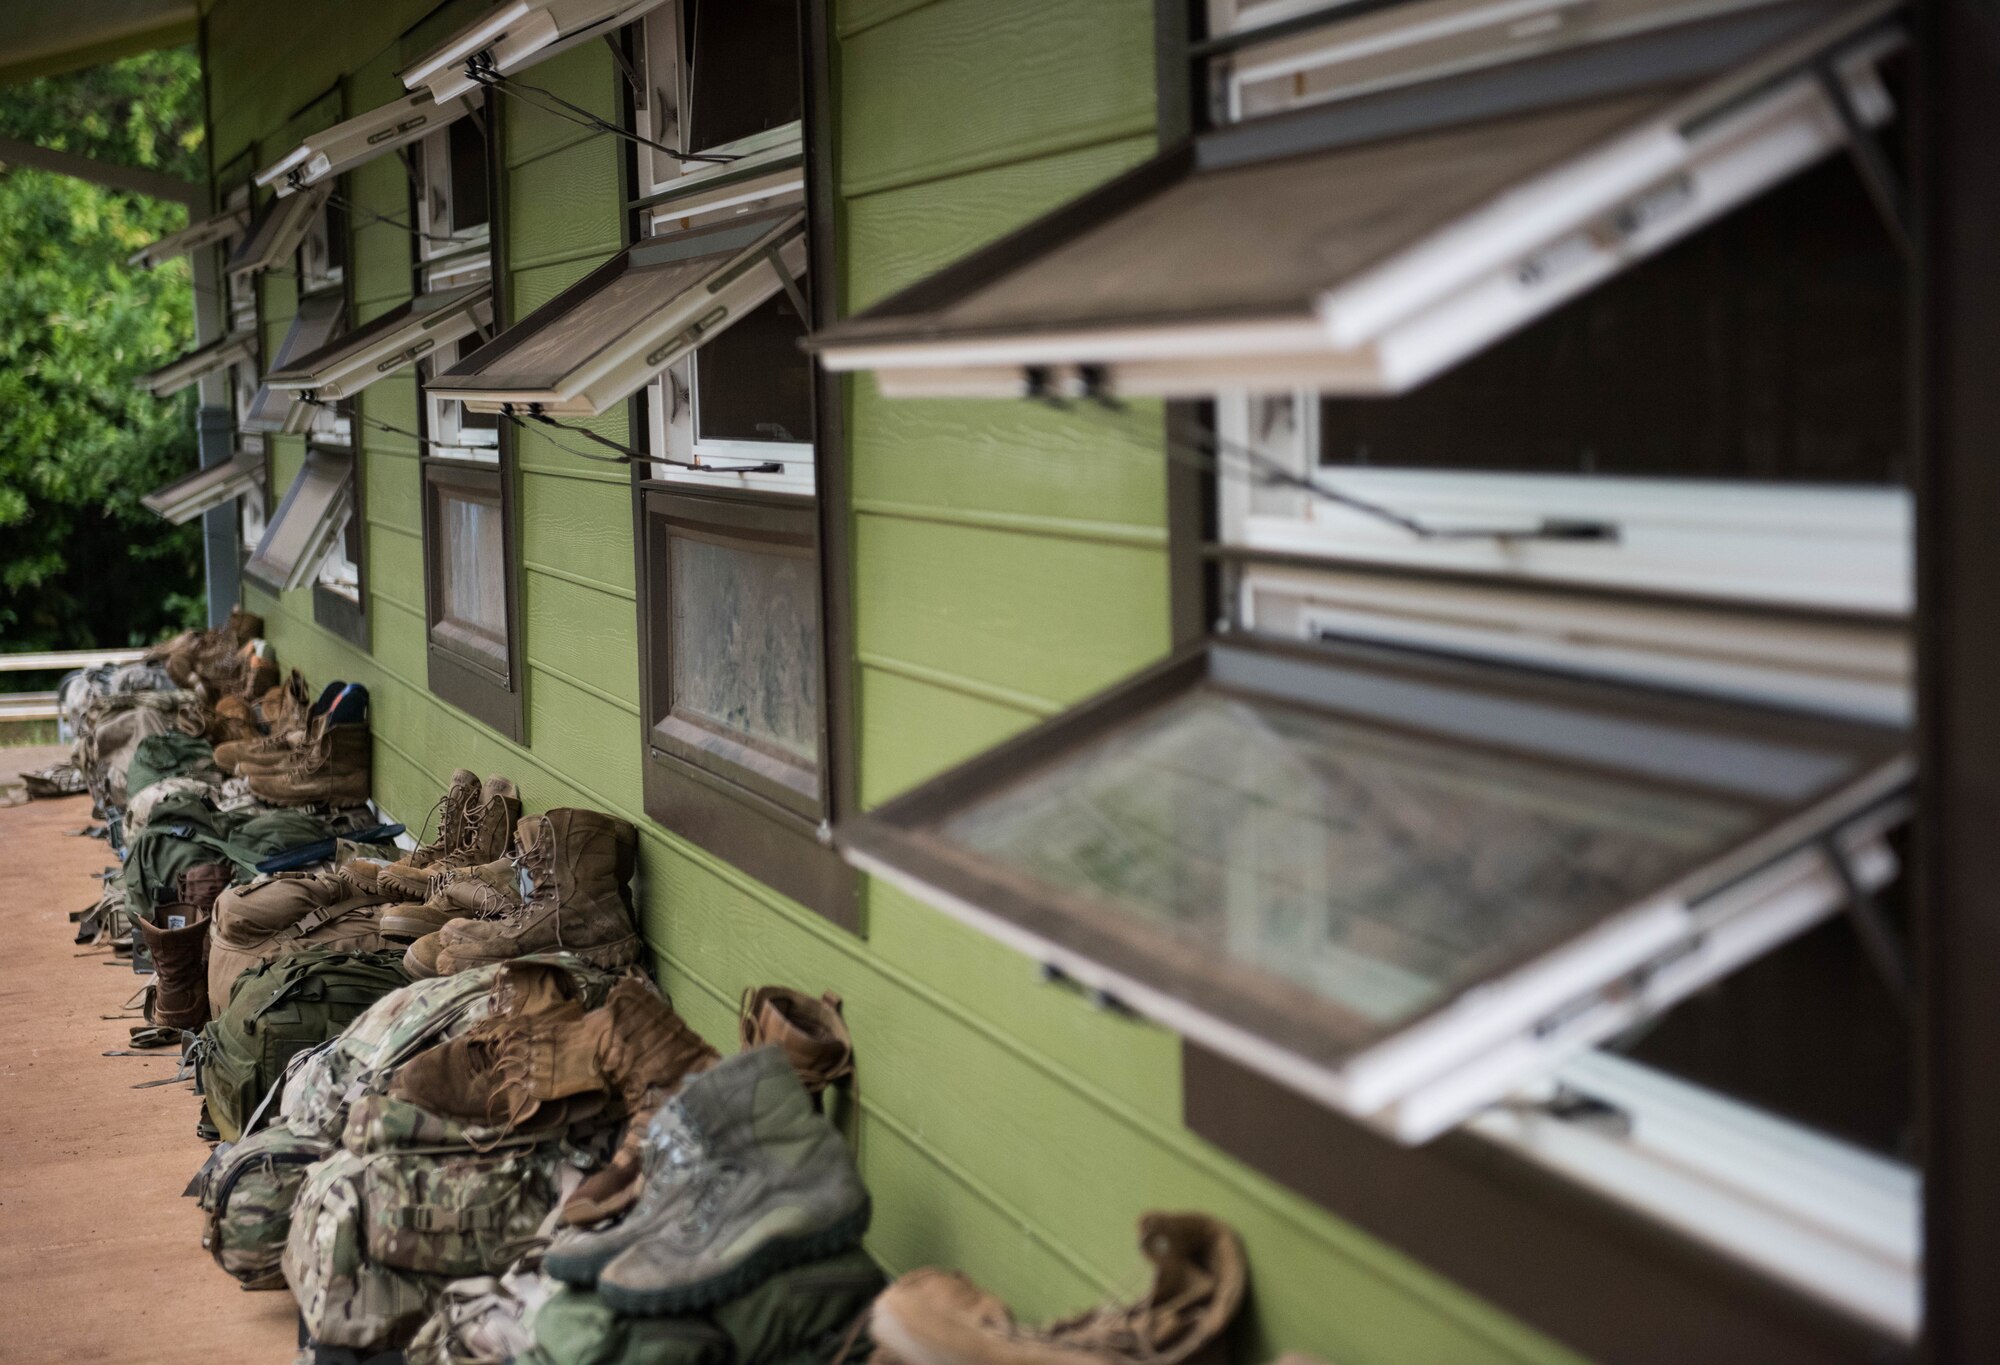 Airmen’s rucks and uniform items sit outside their barracks during a three-week Ranger Assessment Course near Schofield Barracks, Oahu, Hawaii, May 13, 2019. The purpose of the 19-day course is to prepare, assess and evaluate Air Force candidates for Army Ranger School. The Airmen who pass the RAC gain more than a ticket into Ranger School and knowledge on Army tactics – they learn to lead. (U.S. Air Force photo by Staff Sgt. Hailey Haux)